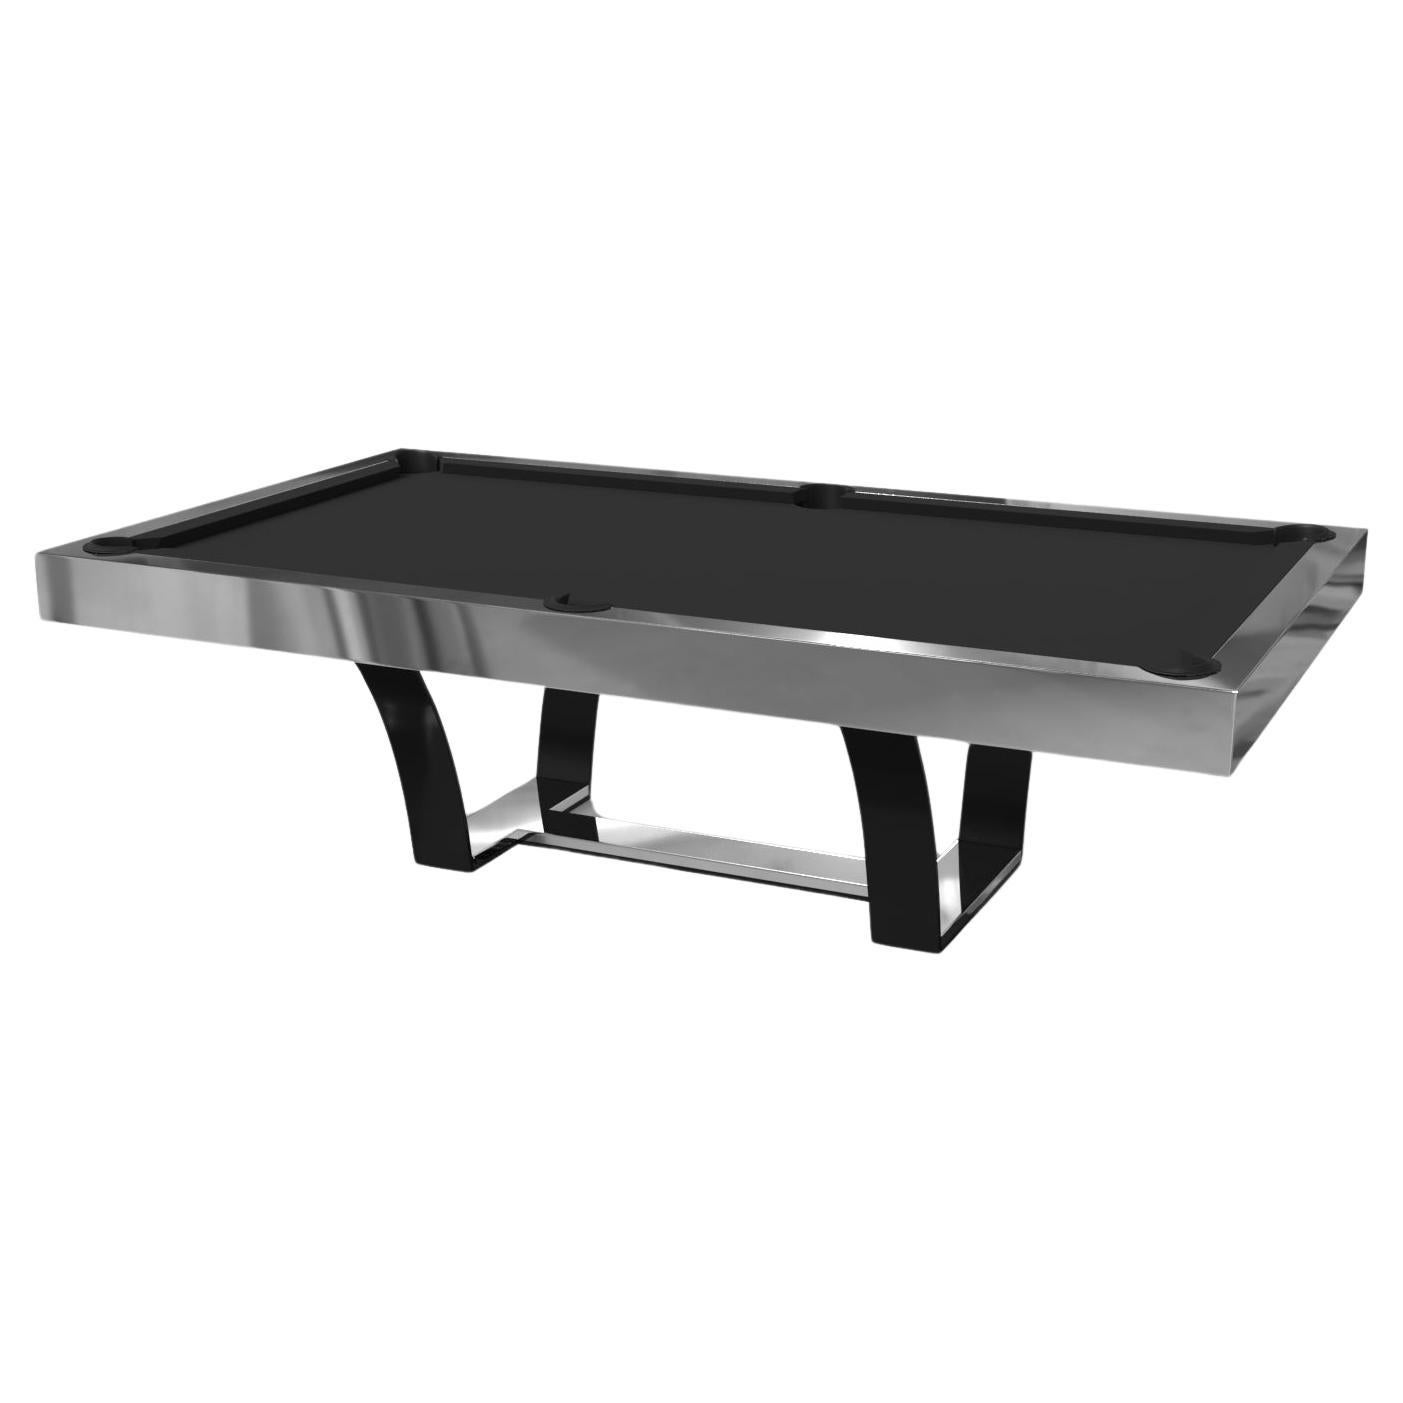 Elevate Customs Elite Pool Table / Solid Stainless Steel in 8.5' - Made in USA For Sale